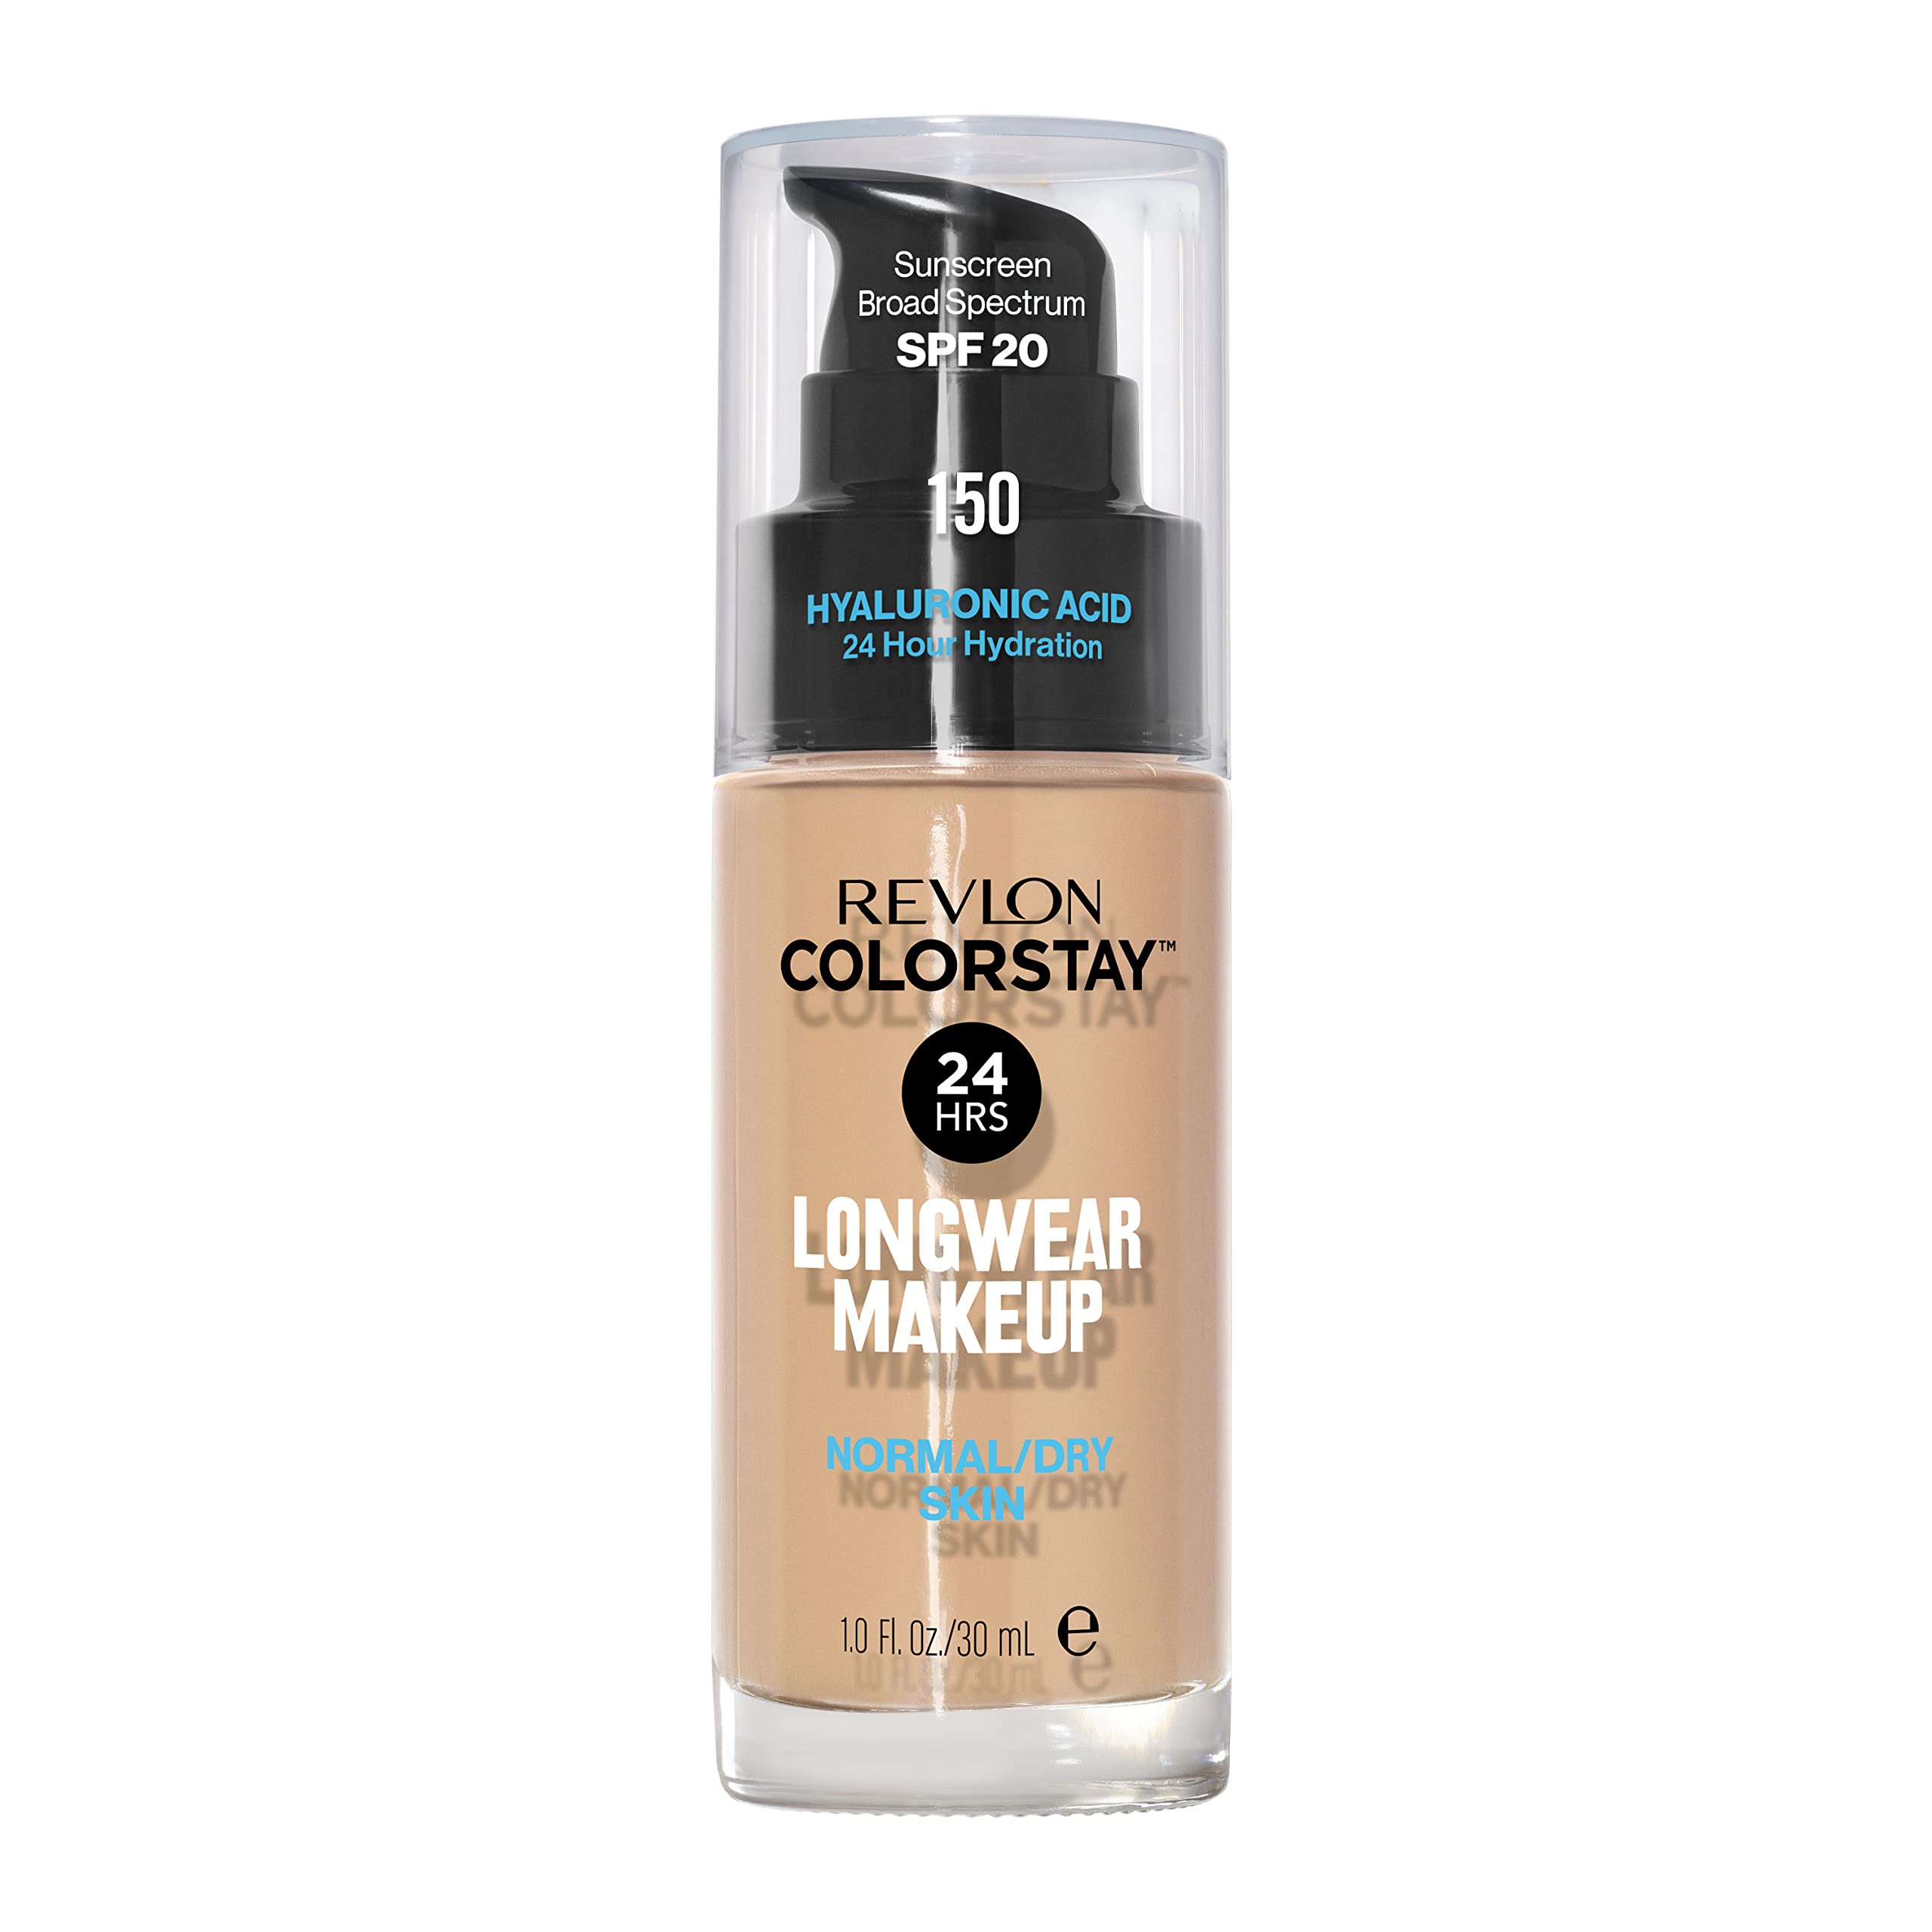 Revlon Liquid Foundation, ColorStay Face Makeup for Normal and Dry Skin, Longwear Full Coverage with Matte Finish, Oil Free, 150 Buff, 1.0 Oz